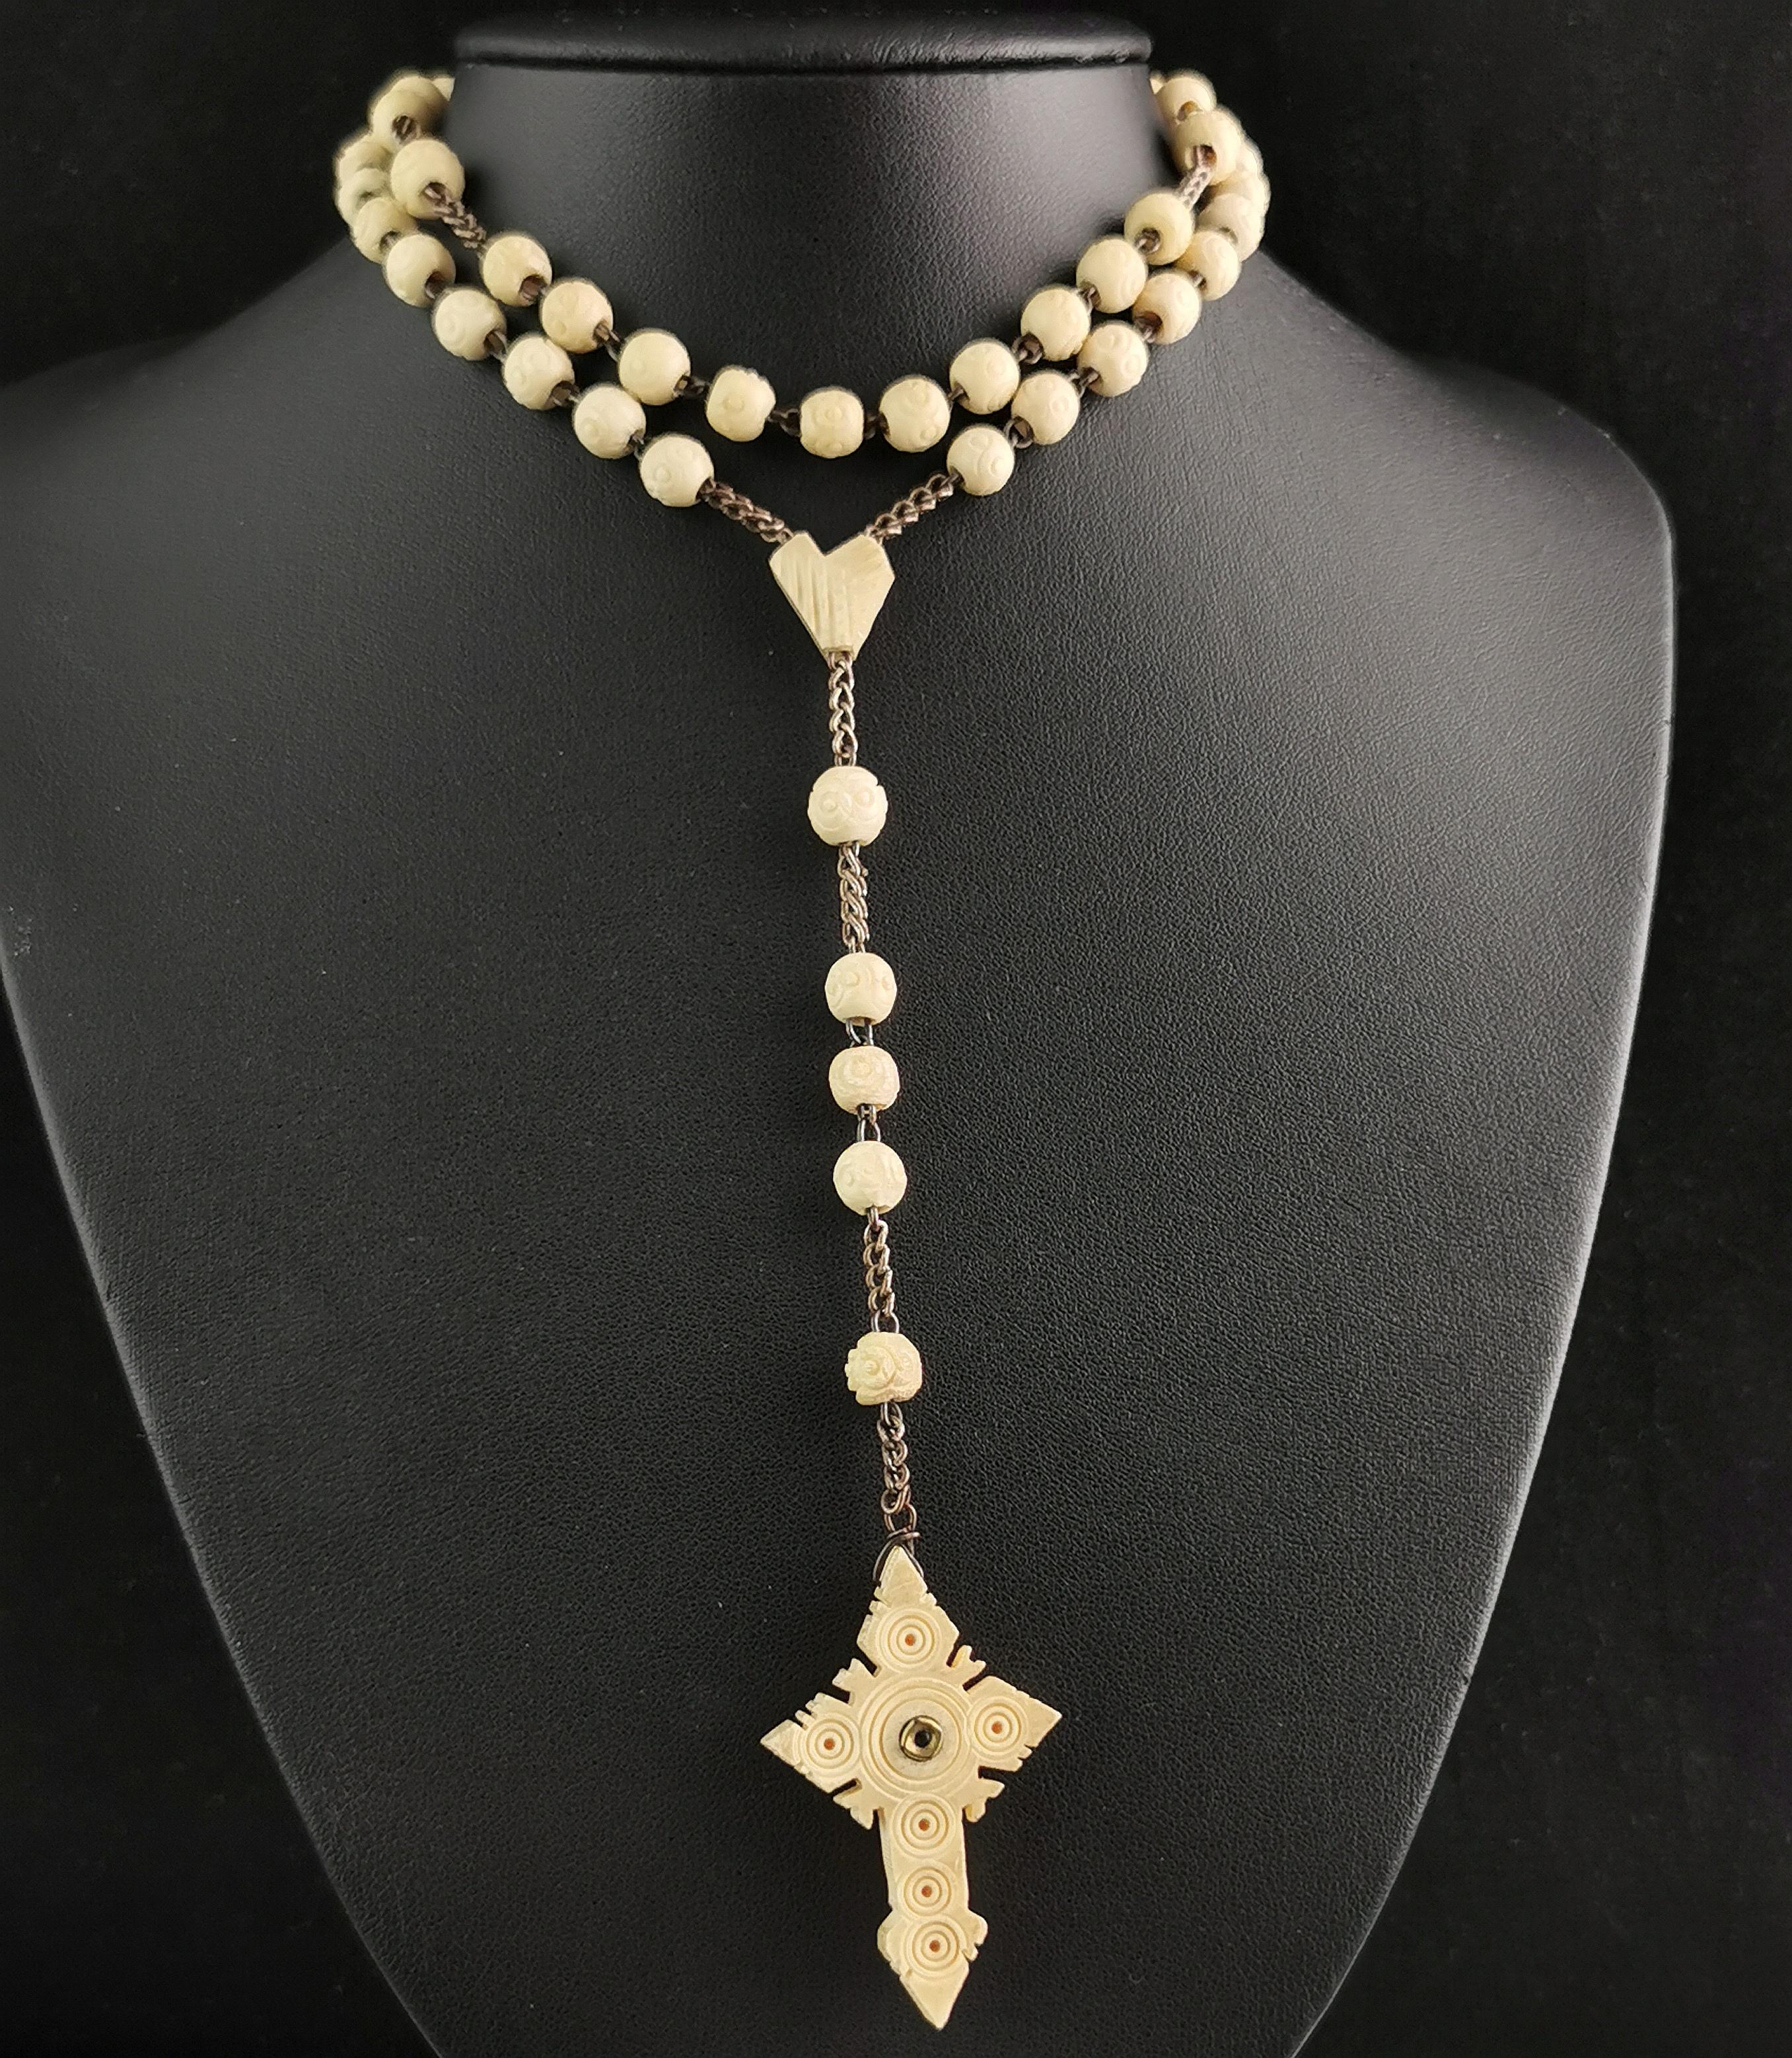 Women's Antique French carved bone rosary bead necklace, Cross pendant, Stanhope 